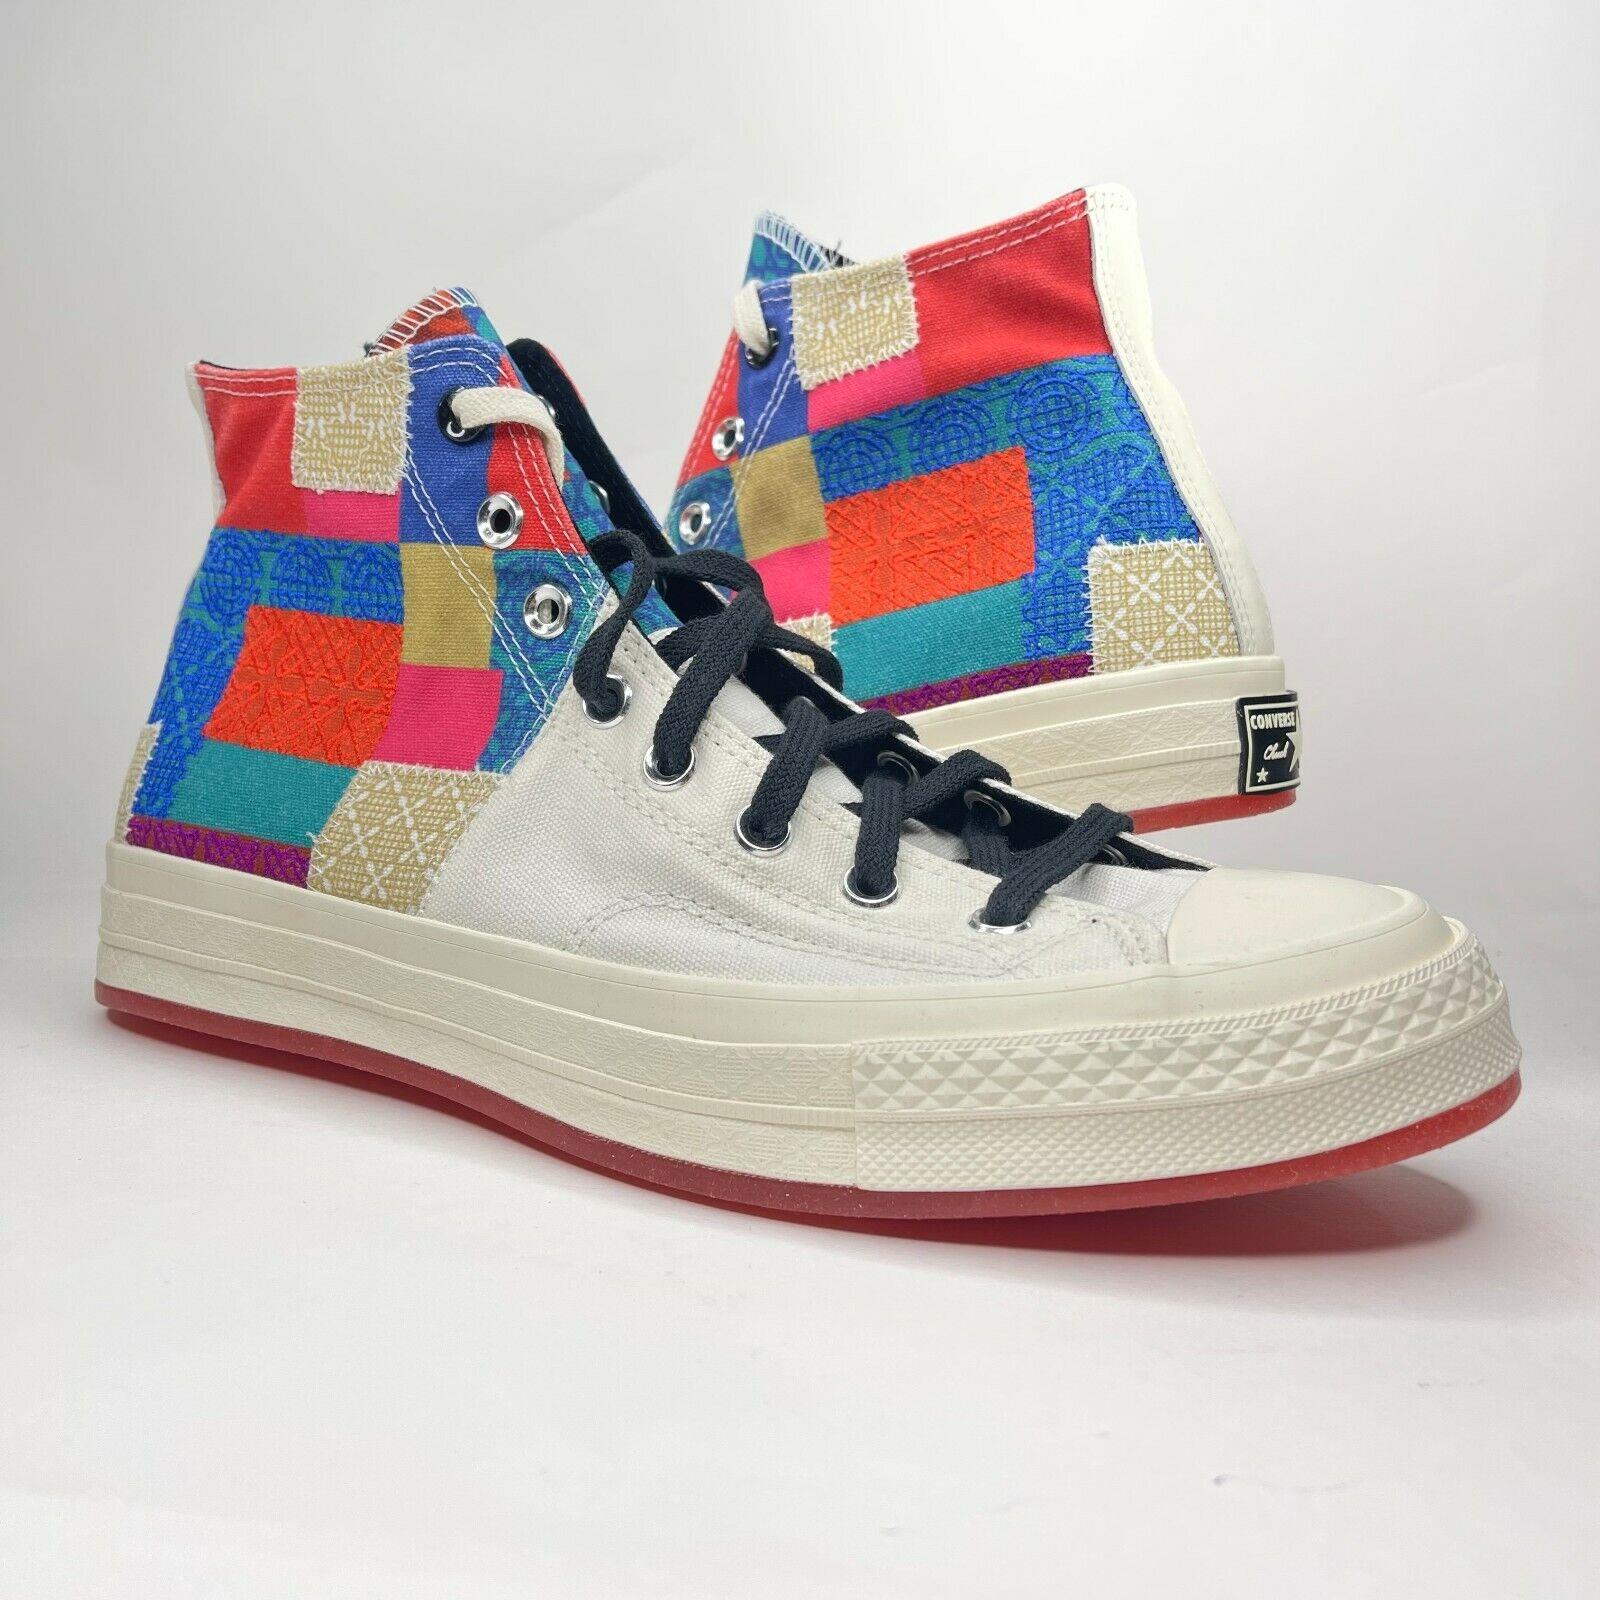 Converse Mens Chuck 70 High Chinese Year Patchwork Shoes Size 9.5 170565C